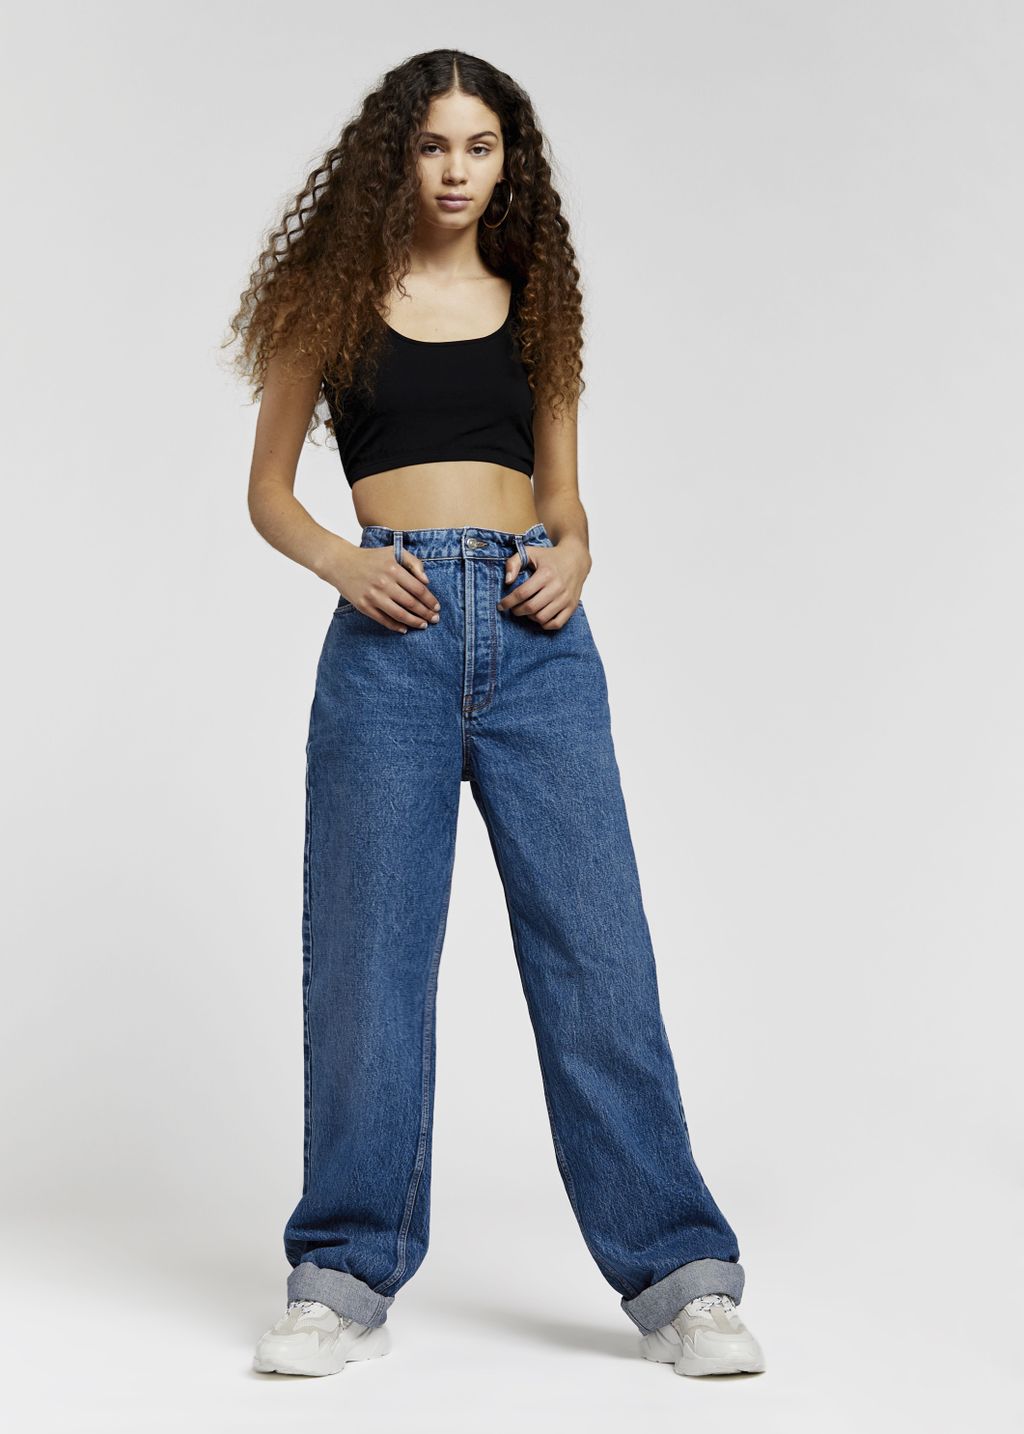 New Topshop Denim | Who What Wear